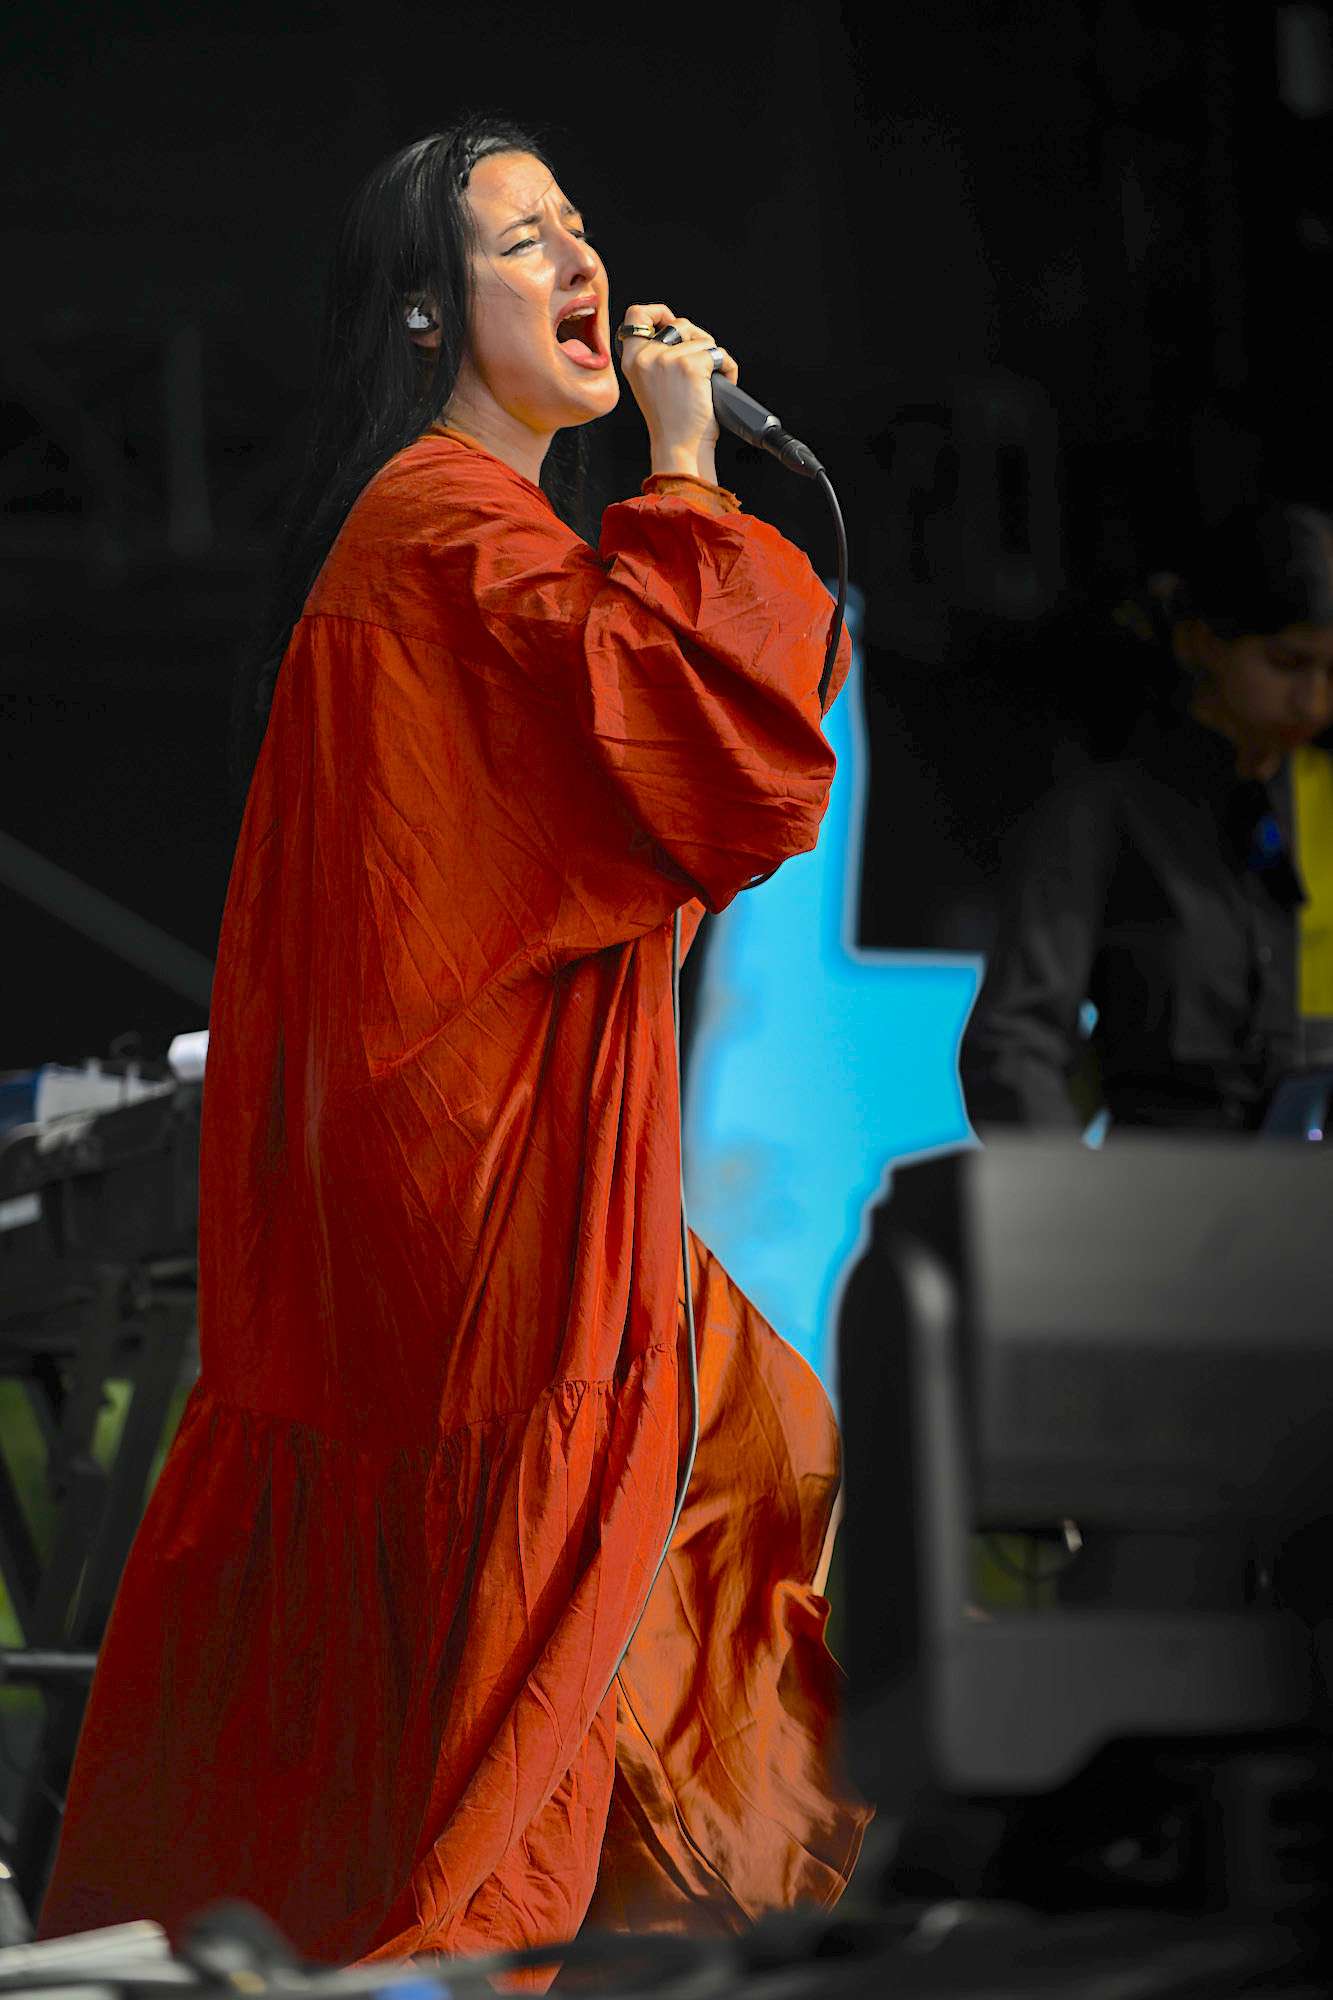 Zola Jesus Live at Riot Fest [GALLERY] 7